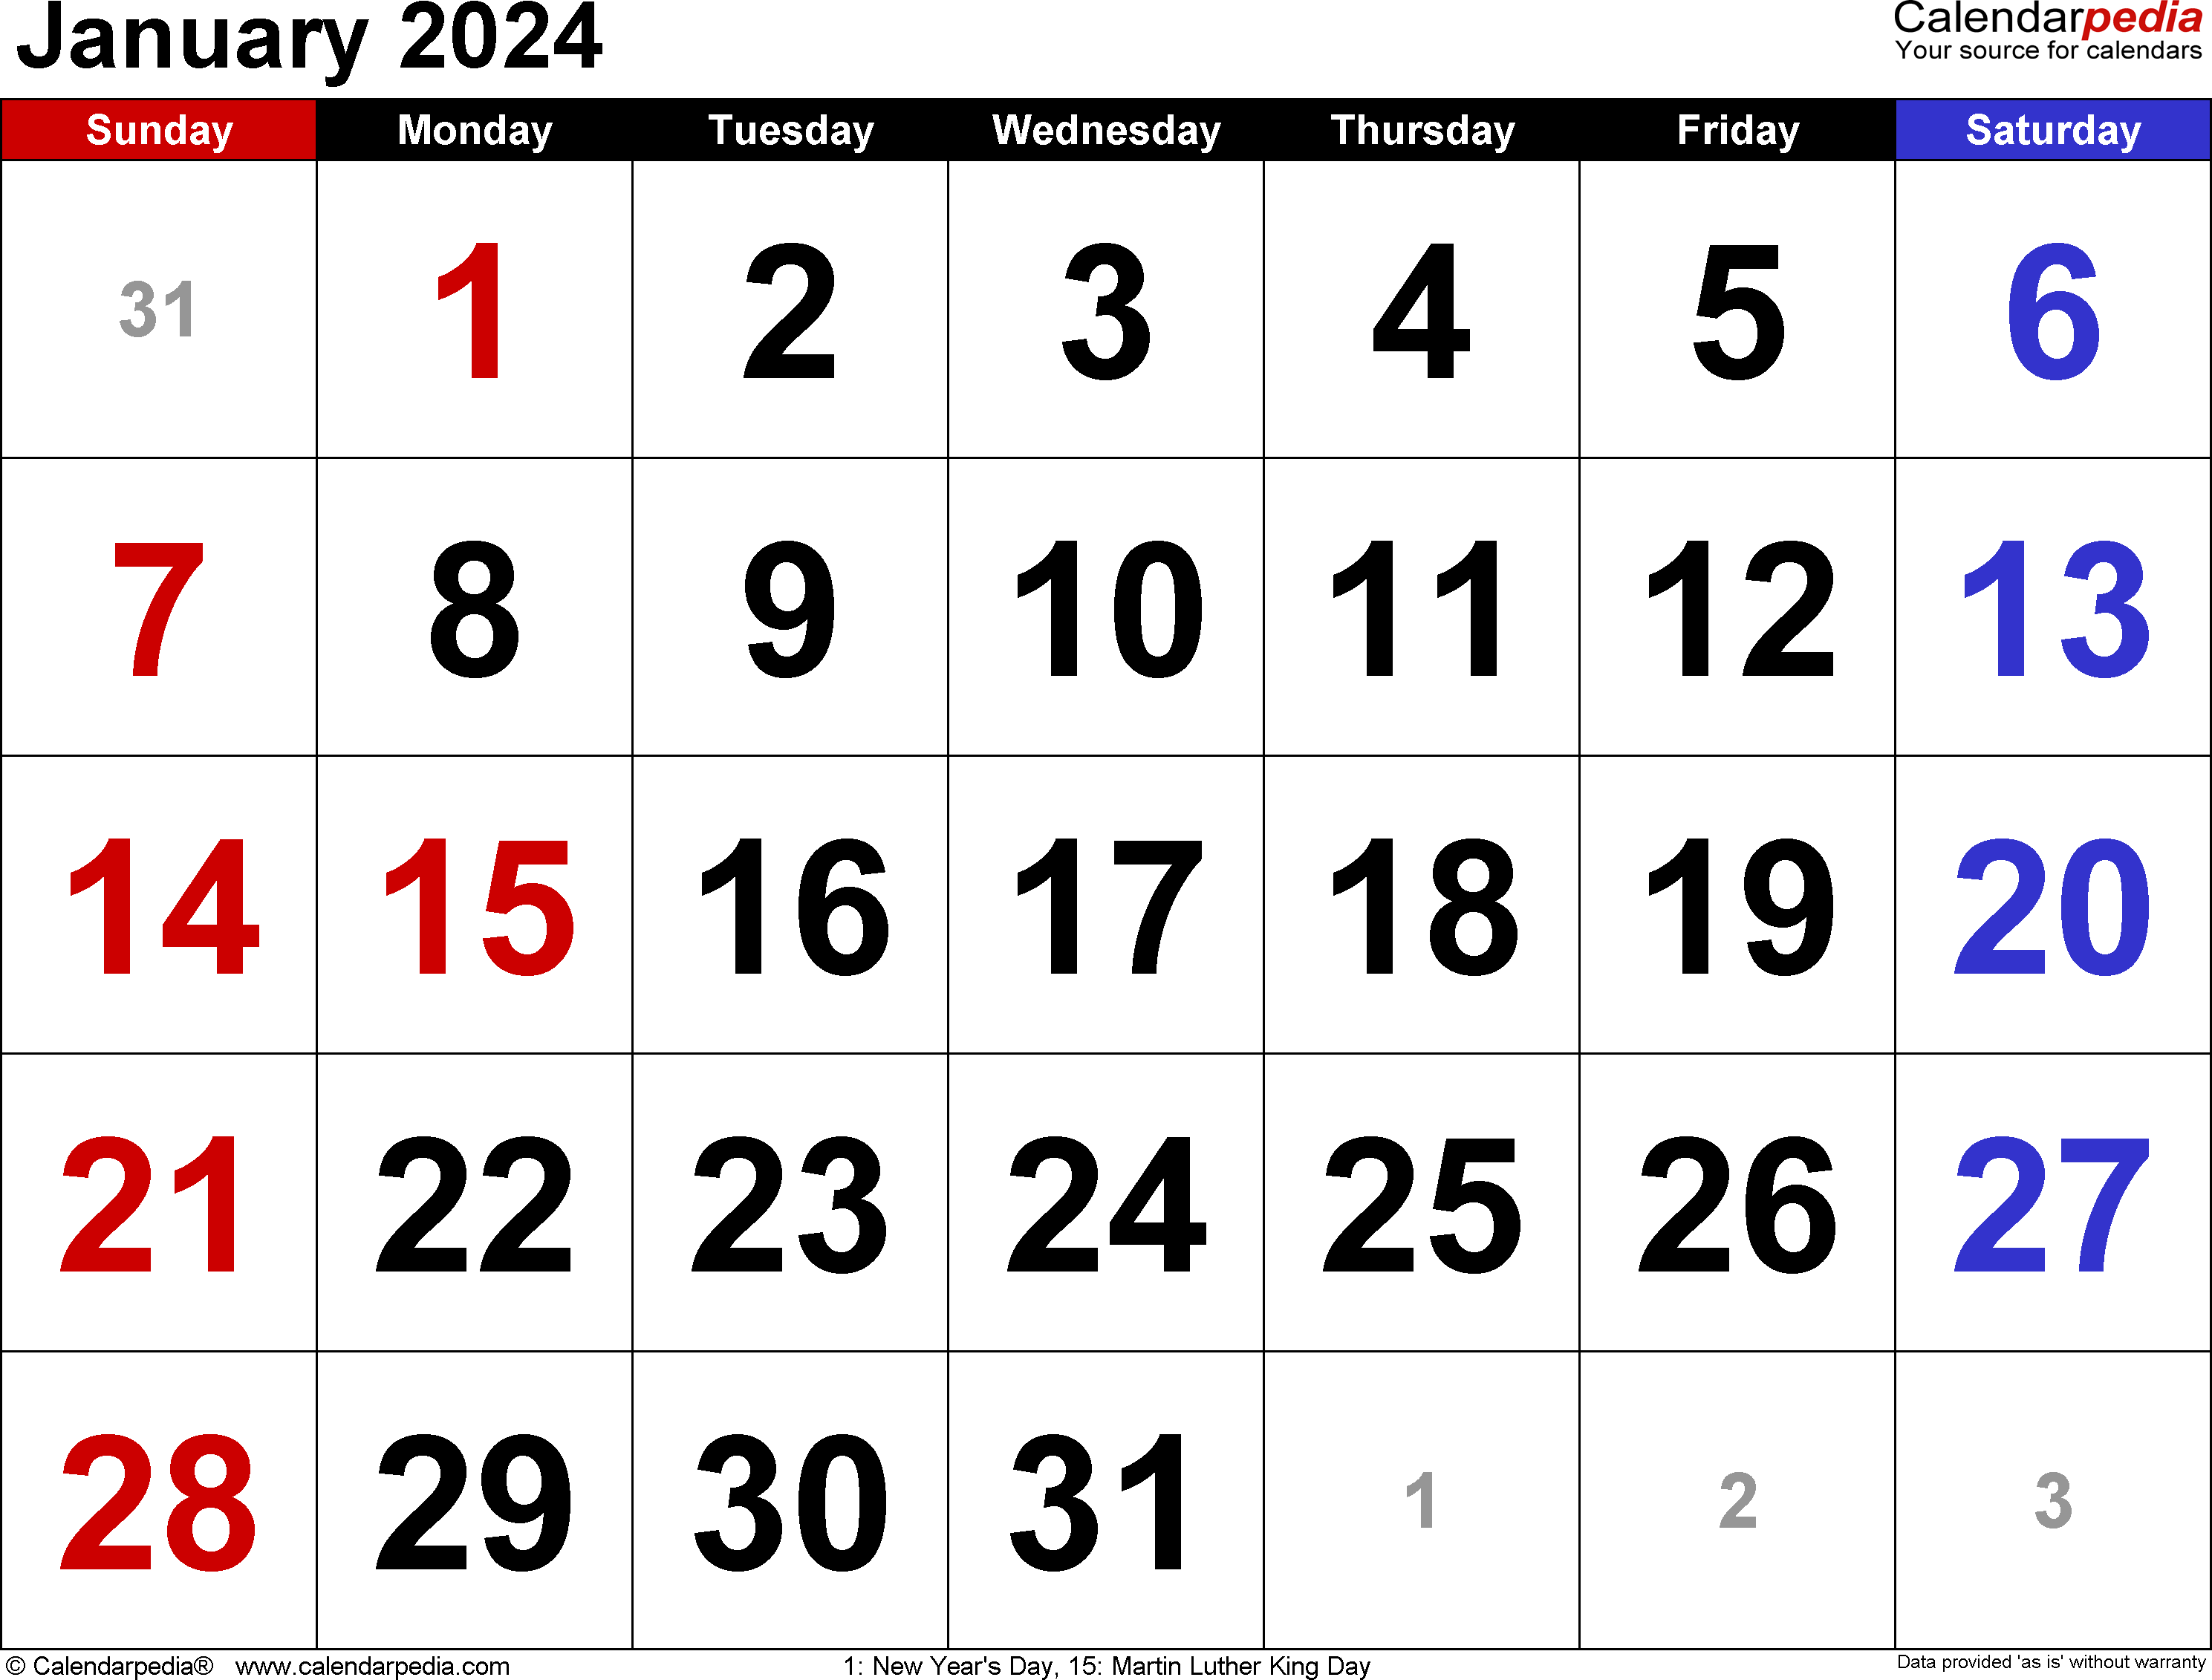 January 2024 Calendar | Templates For Word, Excel And Pdf for January 2024 Printable Calendar Word